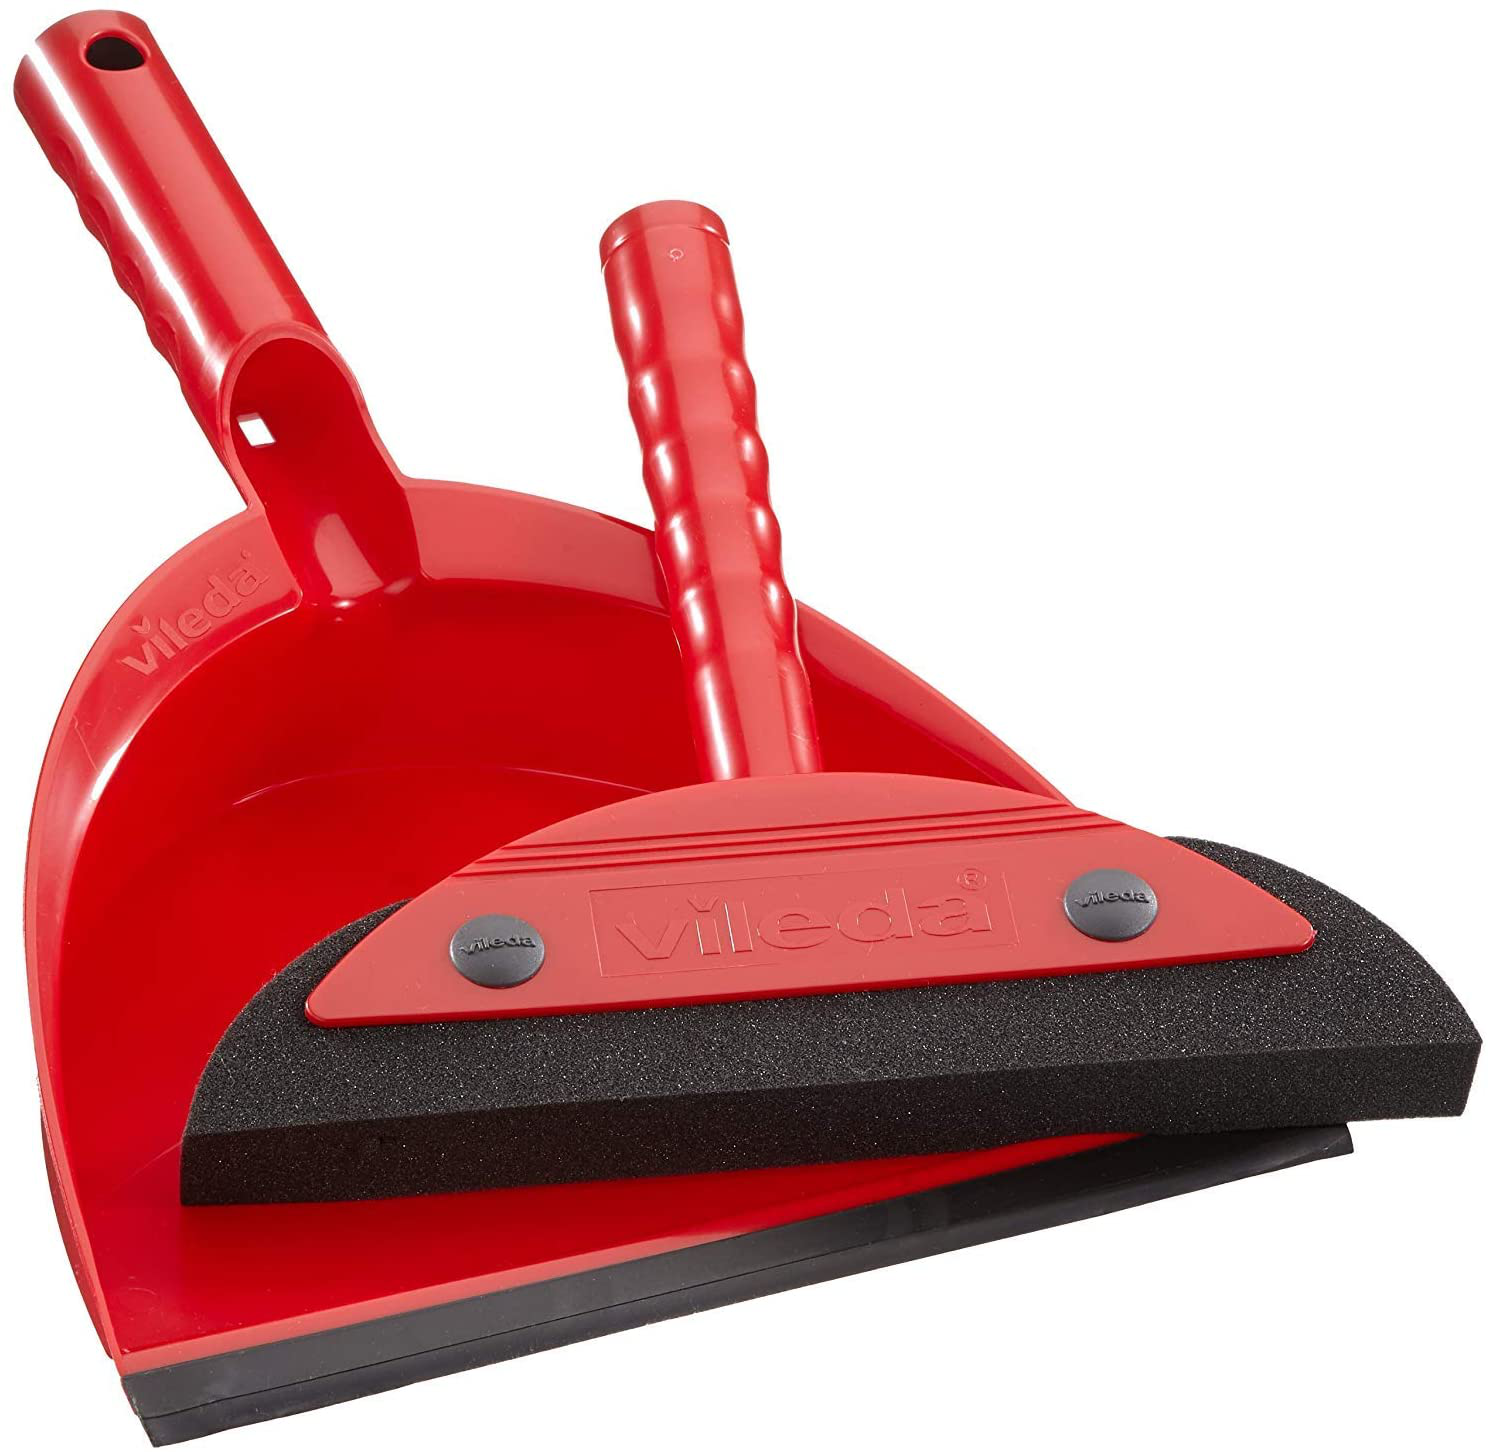 Vileda Super Sweepers Classic kehrset Broom Sweeper Shovel with